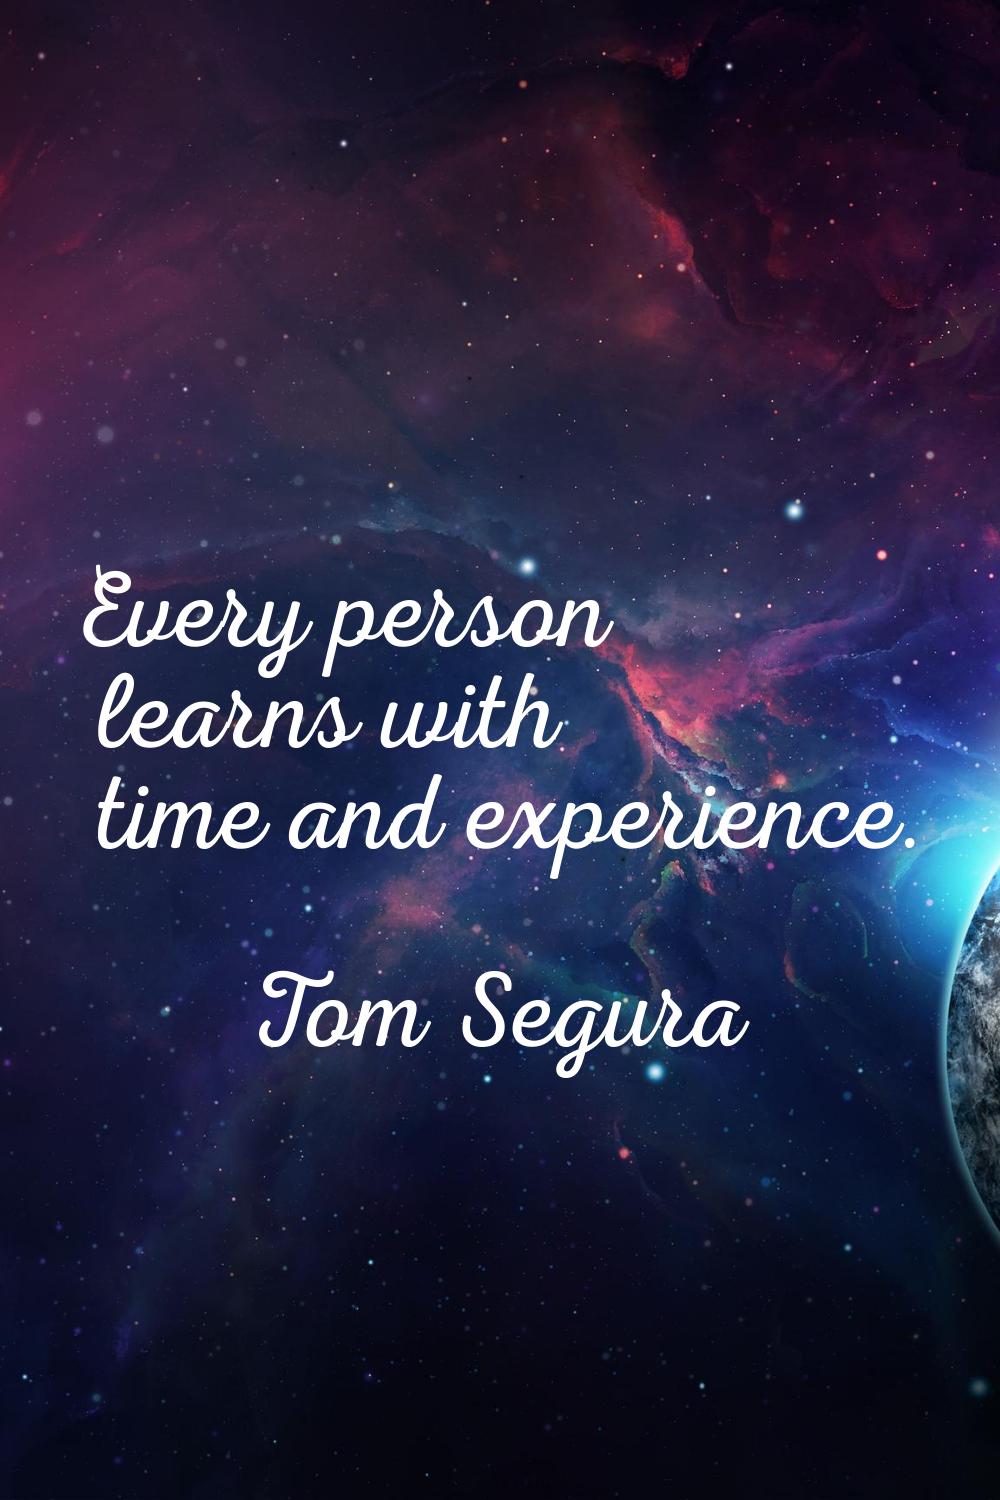 Every person learns with time and experience.